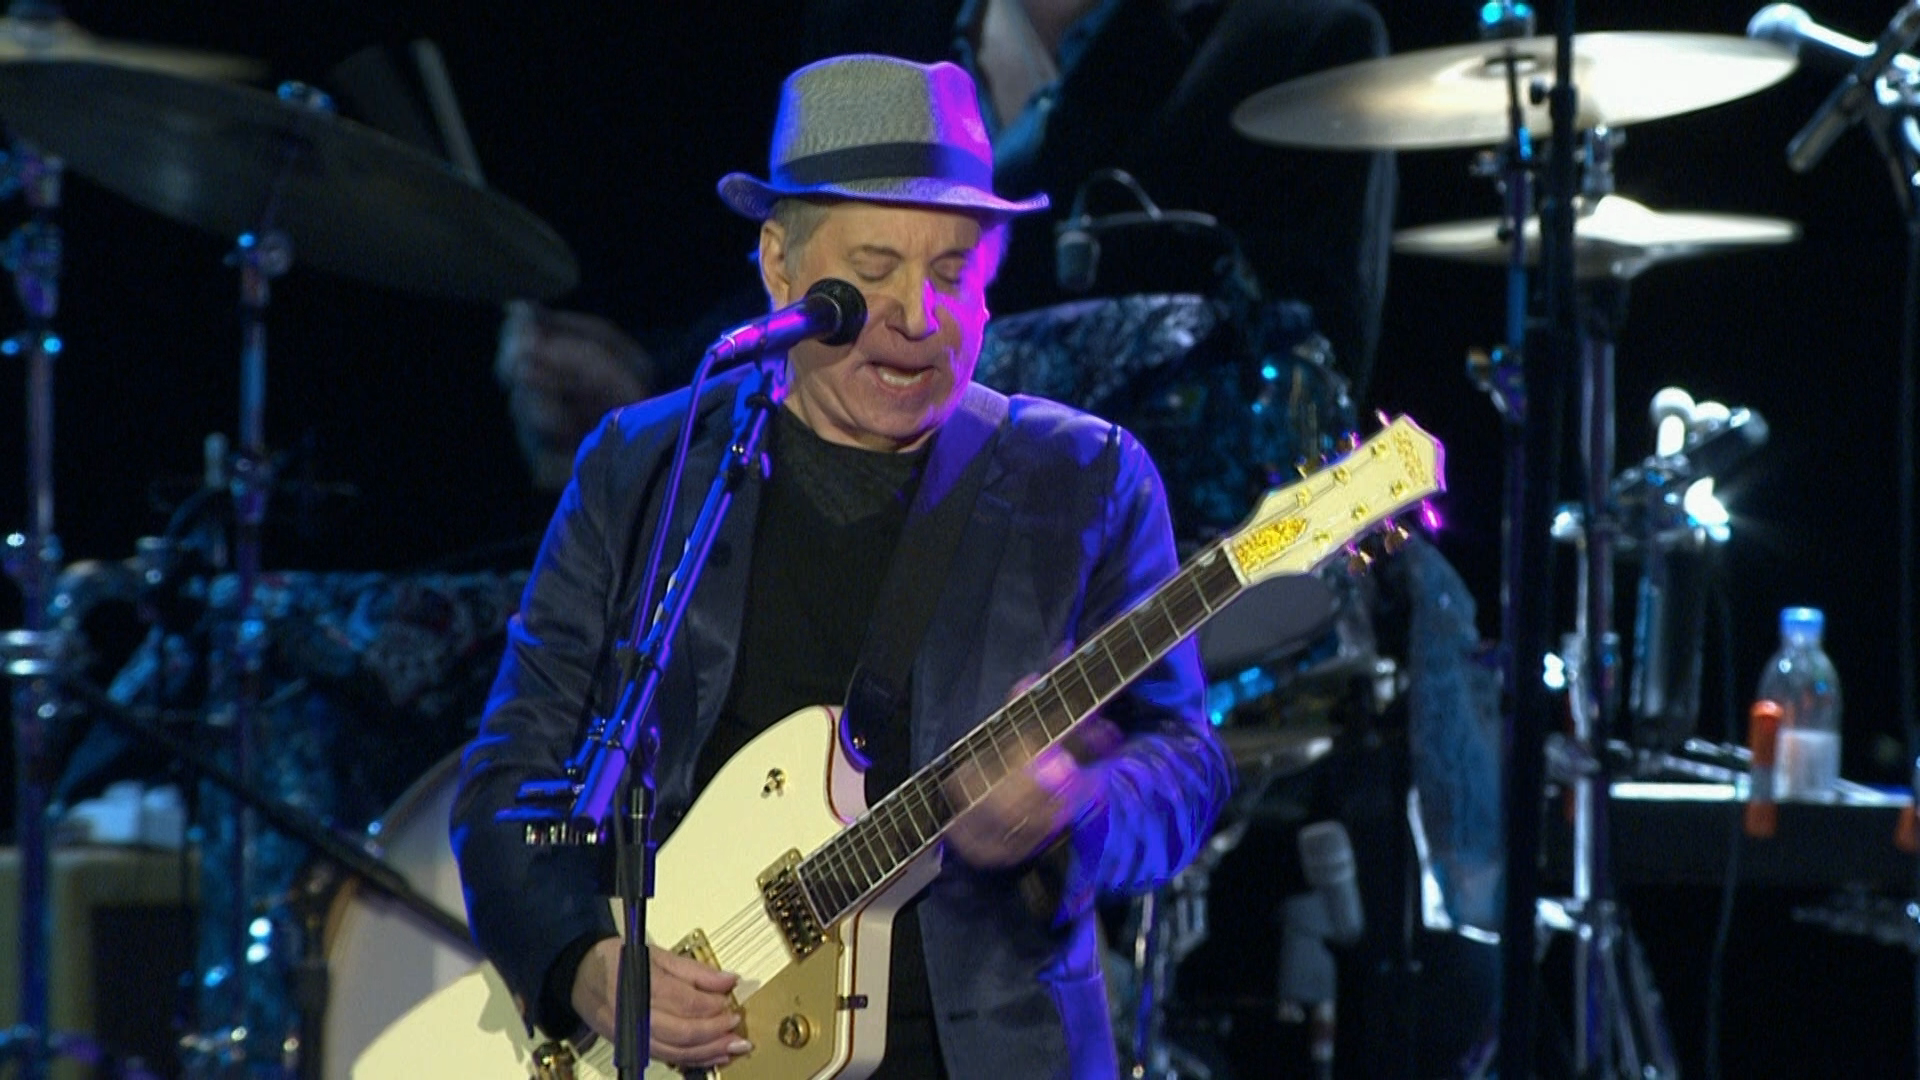 Paul Simon.The Concert in Hyde Park.2017_20171027_200921.529.png